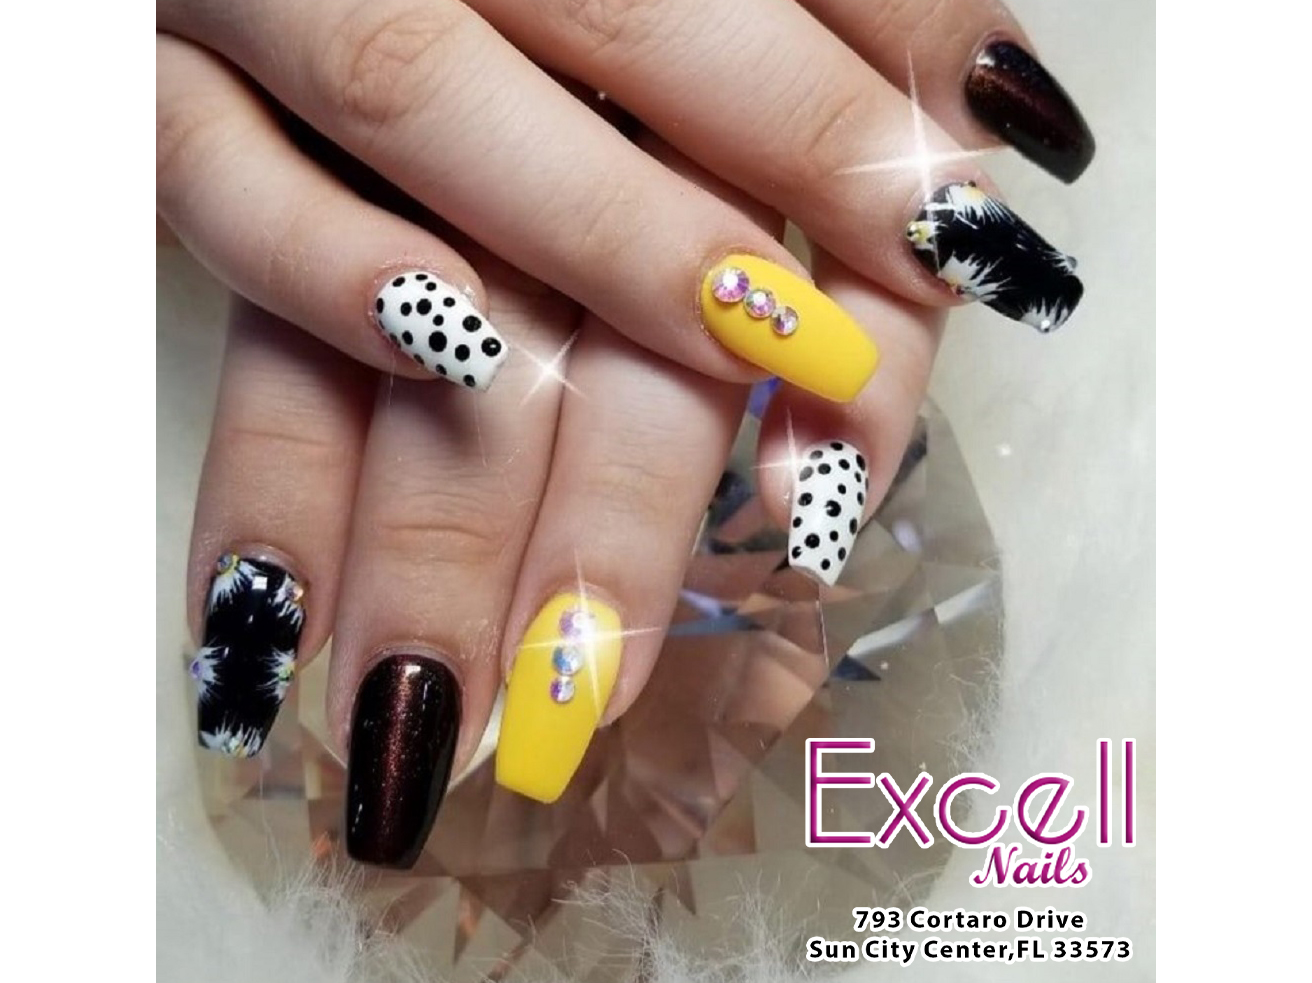 Excell Nails